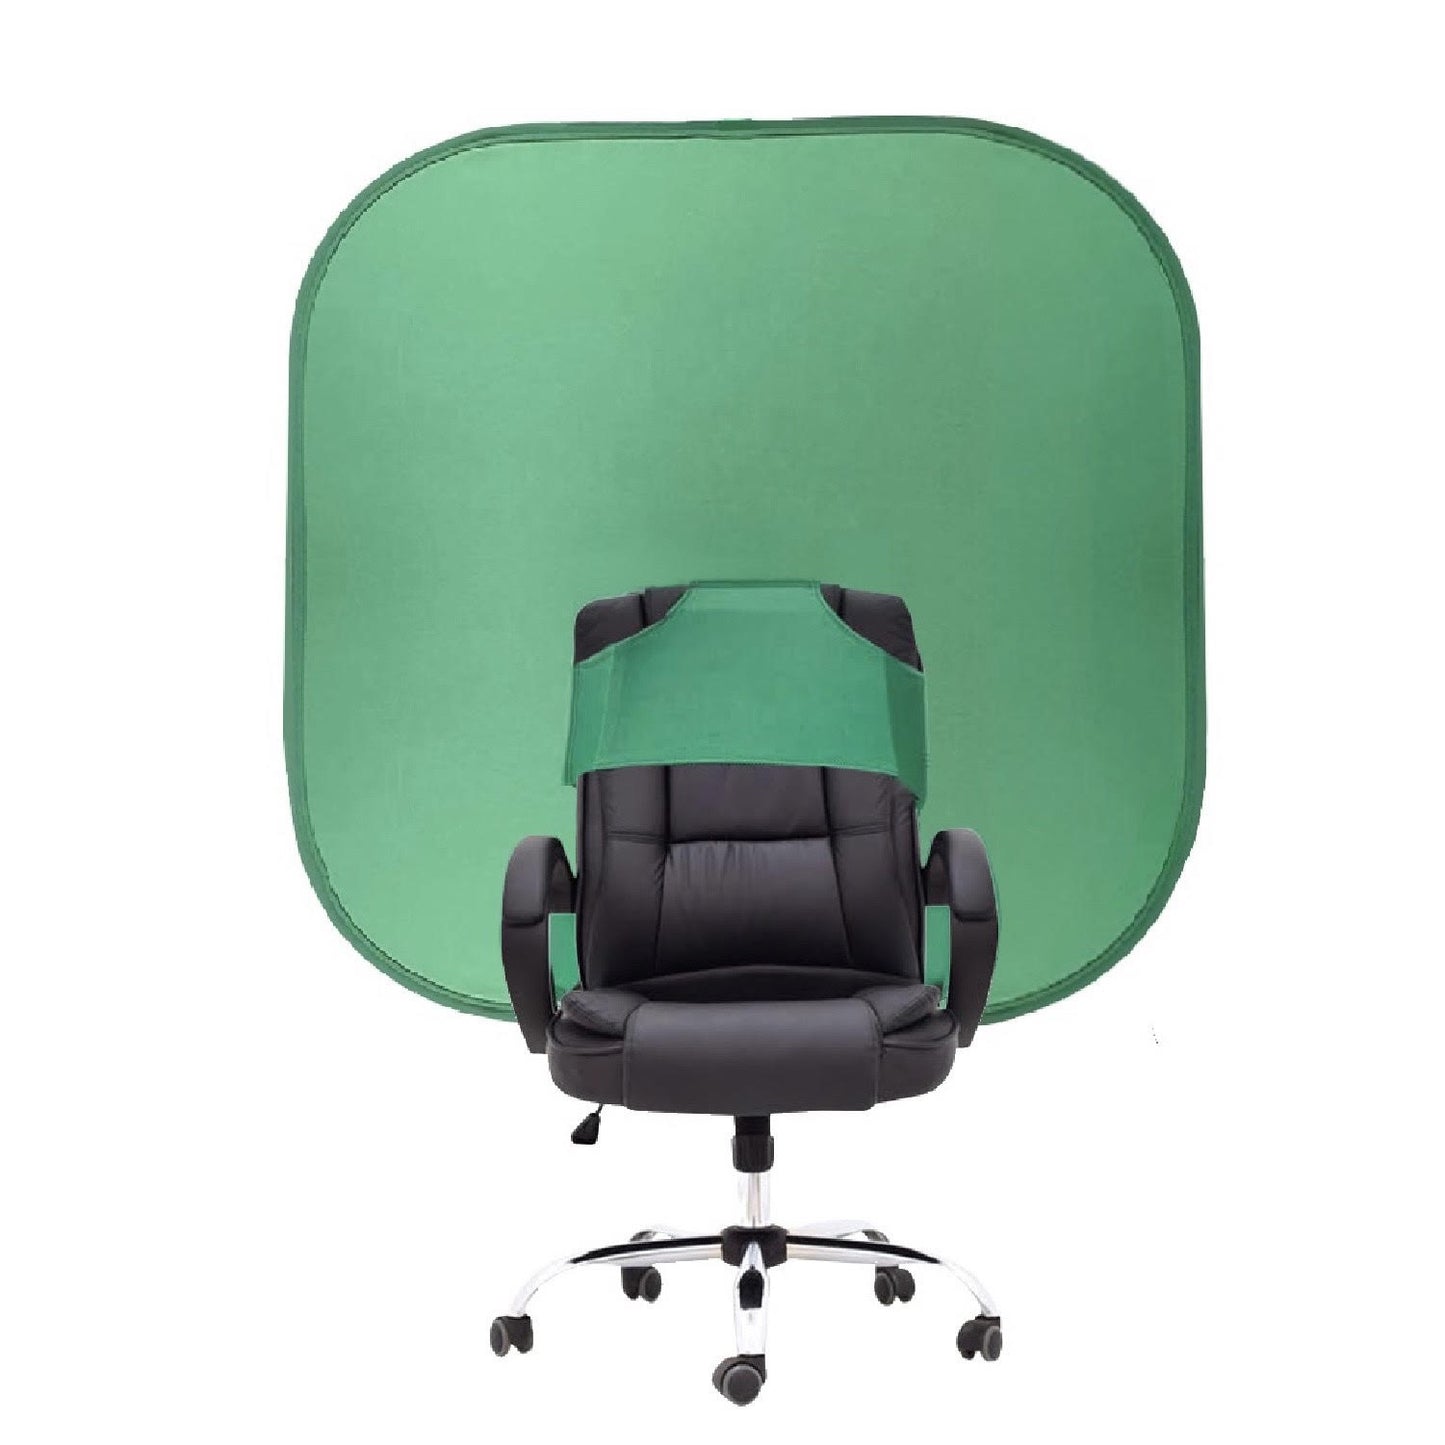 PRYMALL Pop Up Green Screen Background Chair Attachment for Streaming Online with Storage